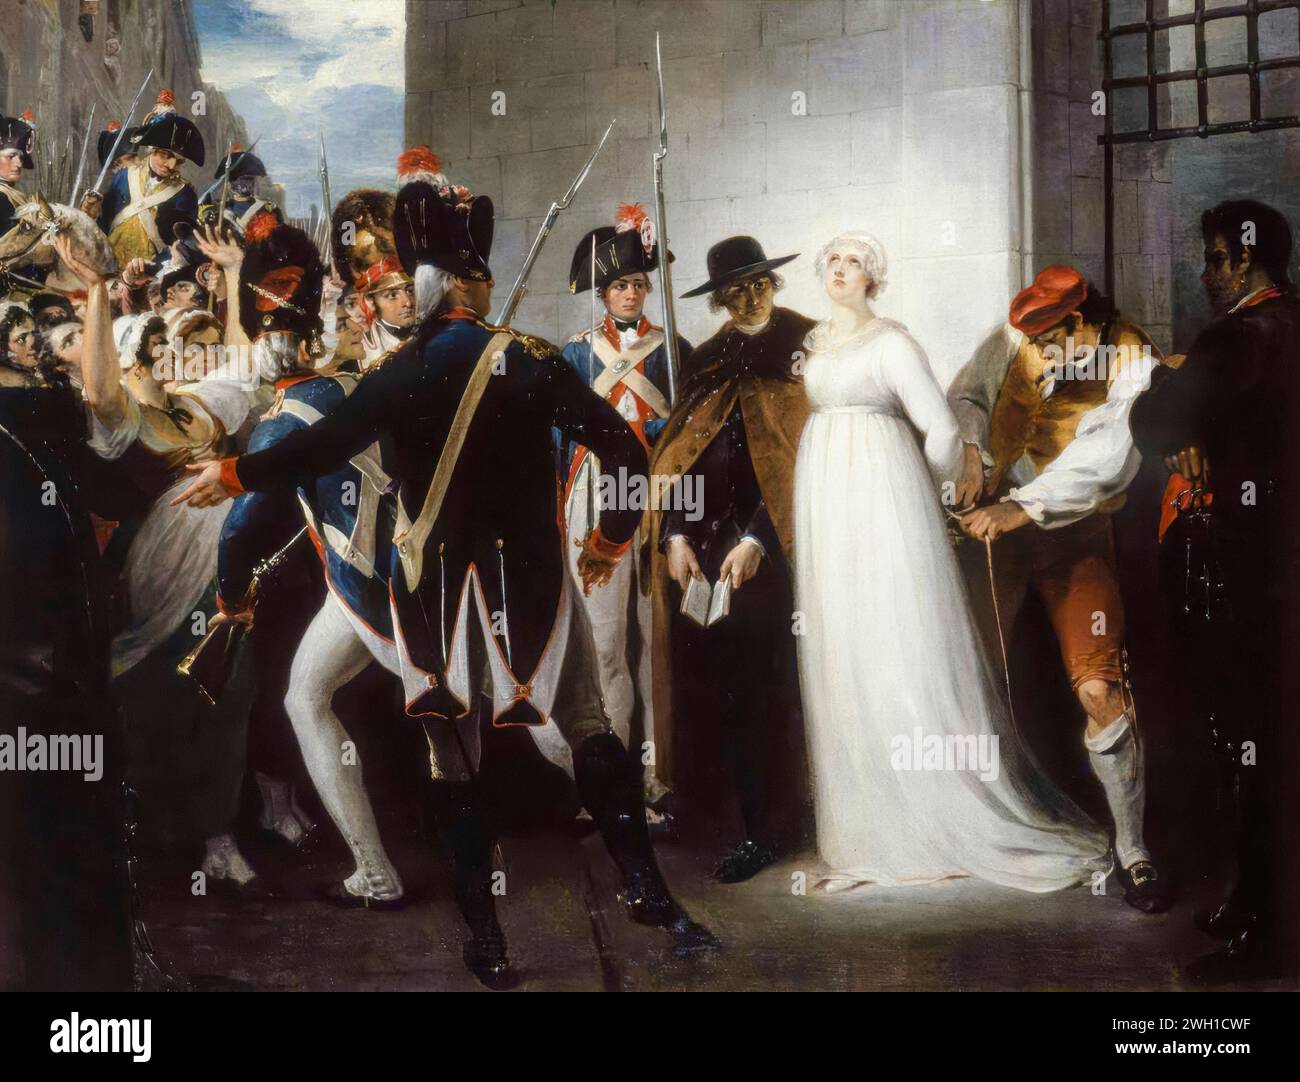 Marie Antoinette being taken to her Execution, October 16th 1793, painting in oil on canvas by William Hamilton, 1794 Stock Photo